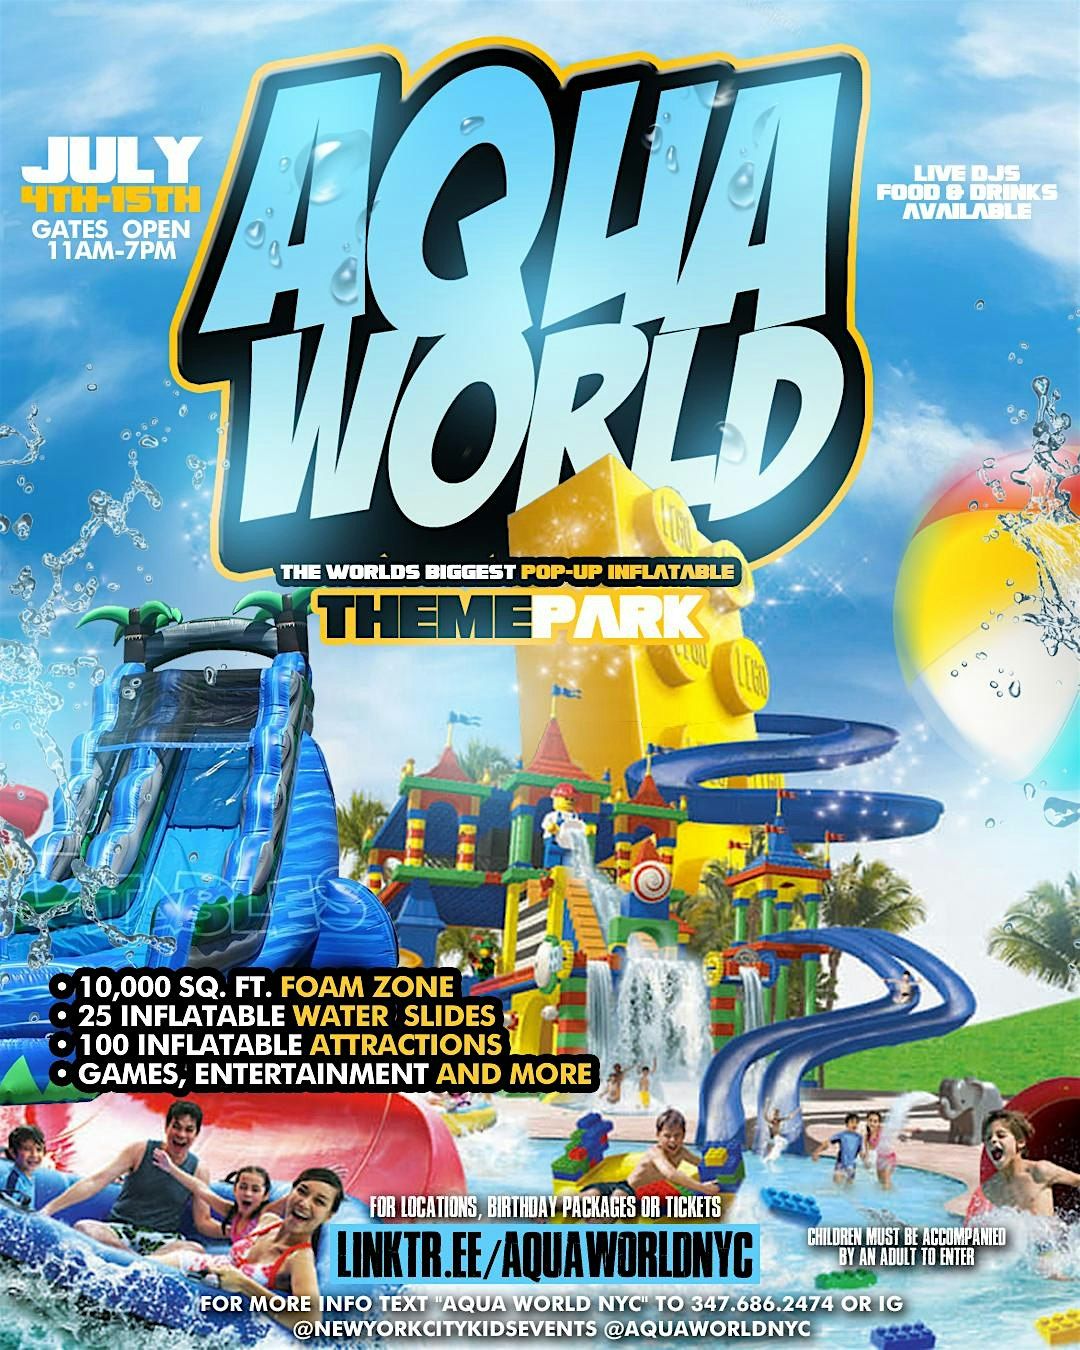 THE WORLDS BIGGEST POP-UP INFLATABLE WATER PARK JULY 4TH